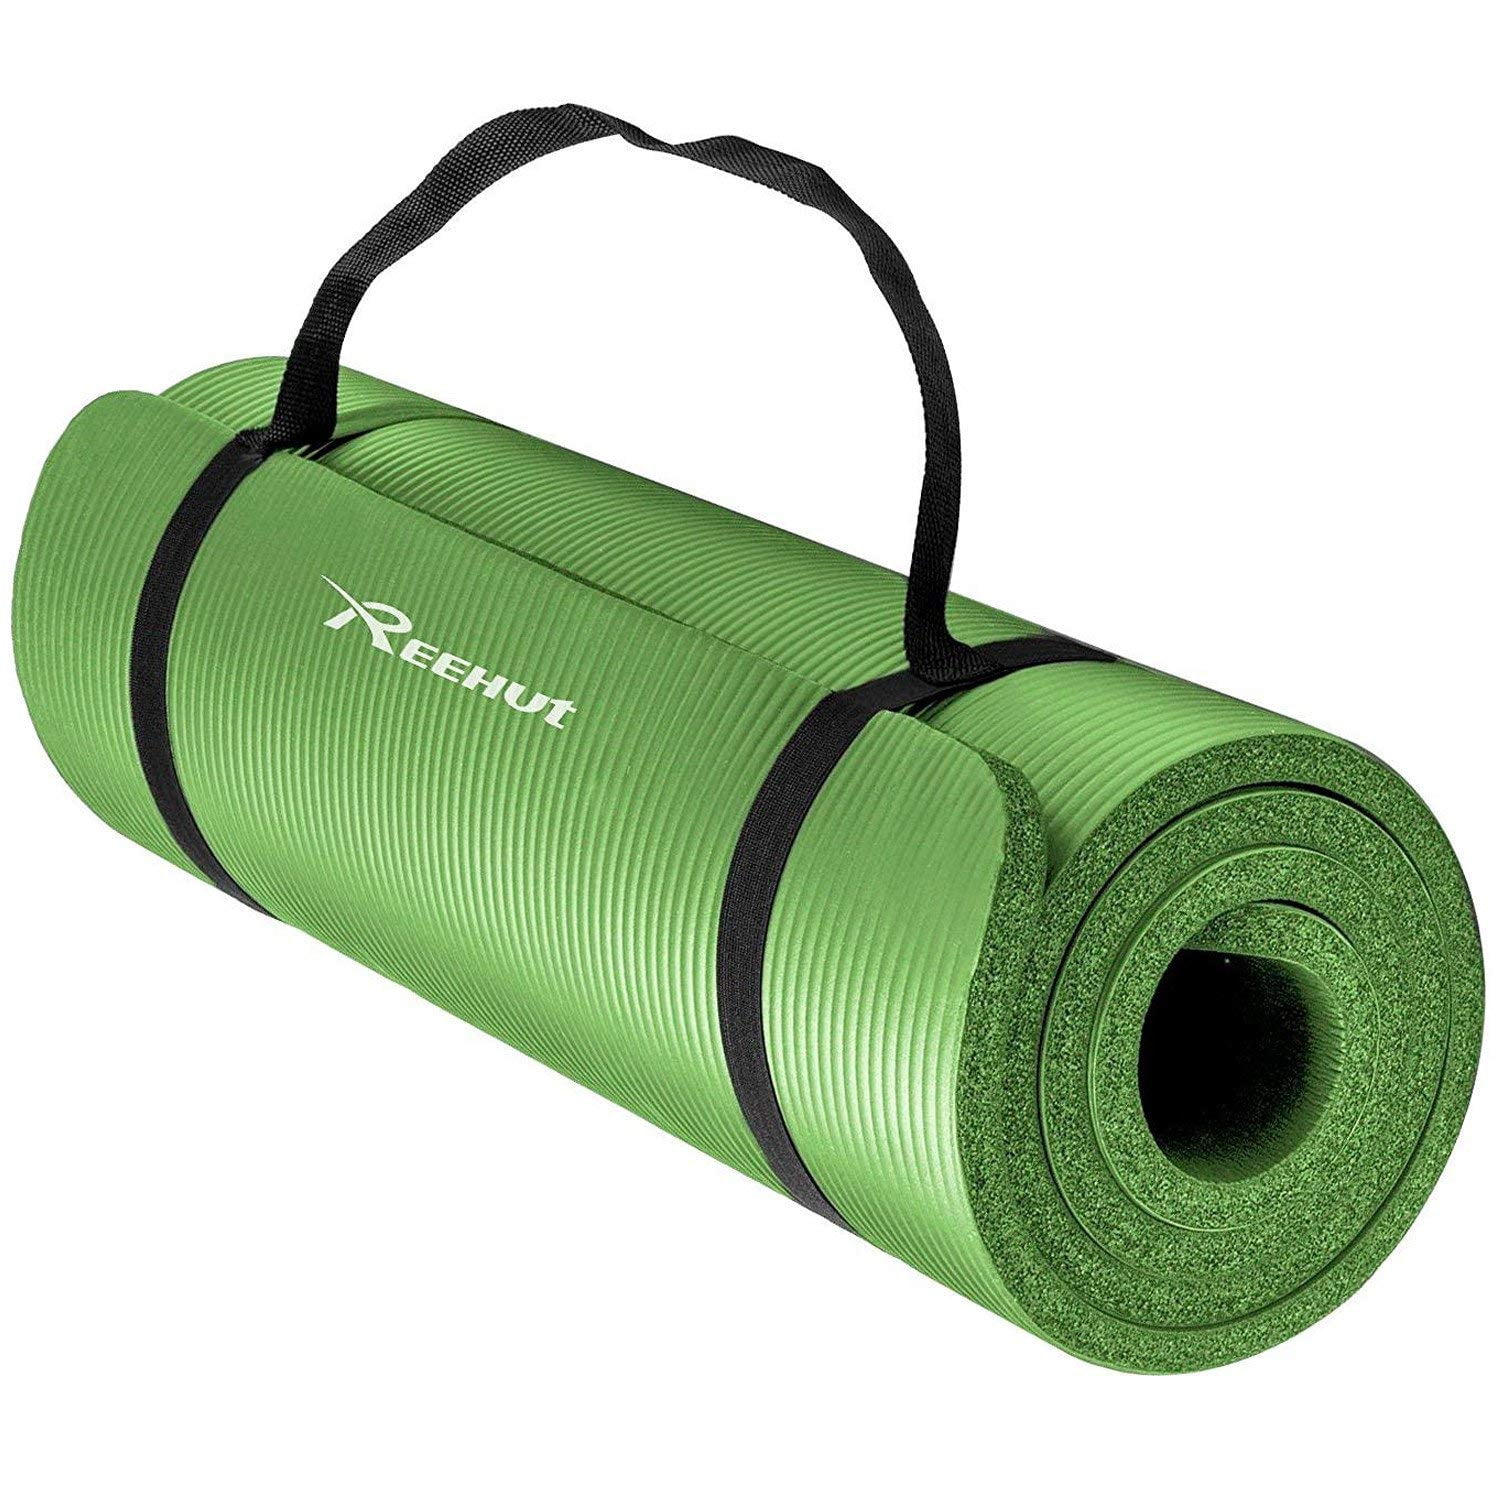 Reehut 1/2-Inch Extra Thick High Density NBR Exercise Yoga Mat for Pilates,  Fitness & Workout w/ Carrying Strap - Black 